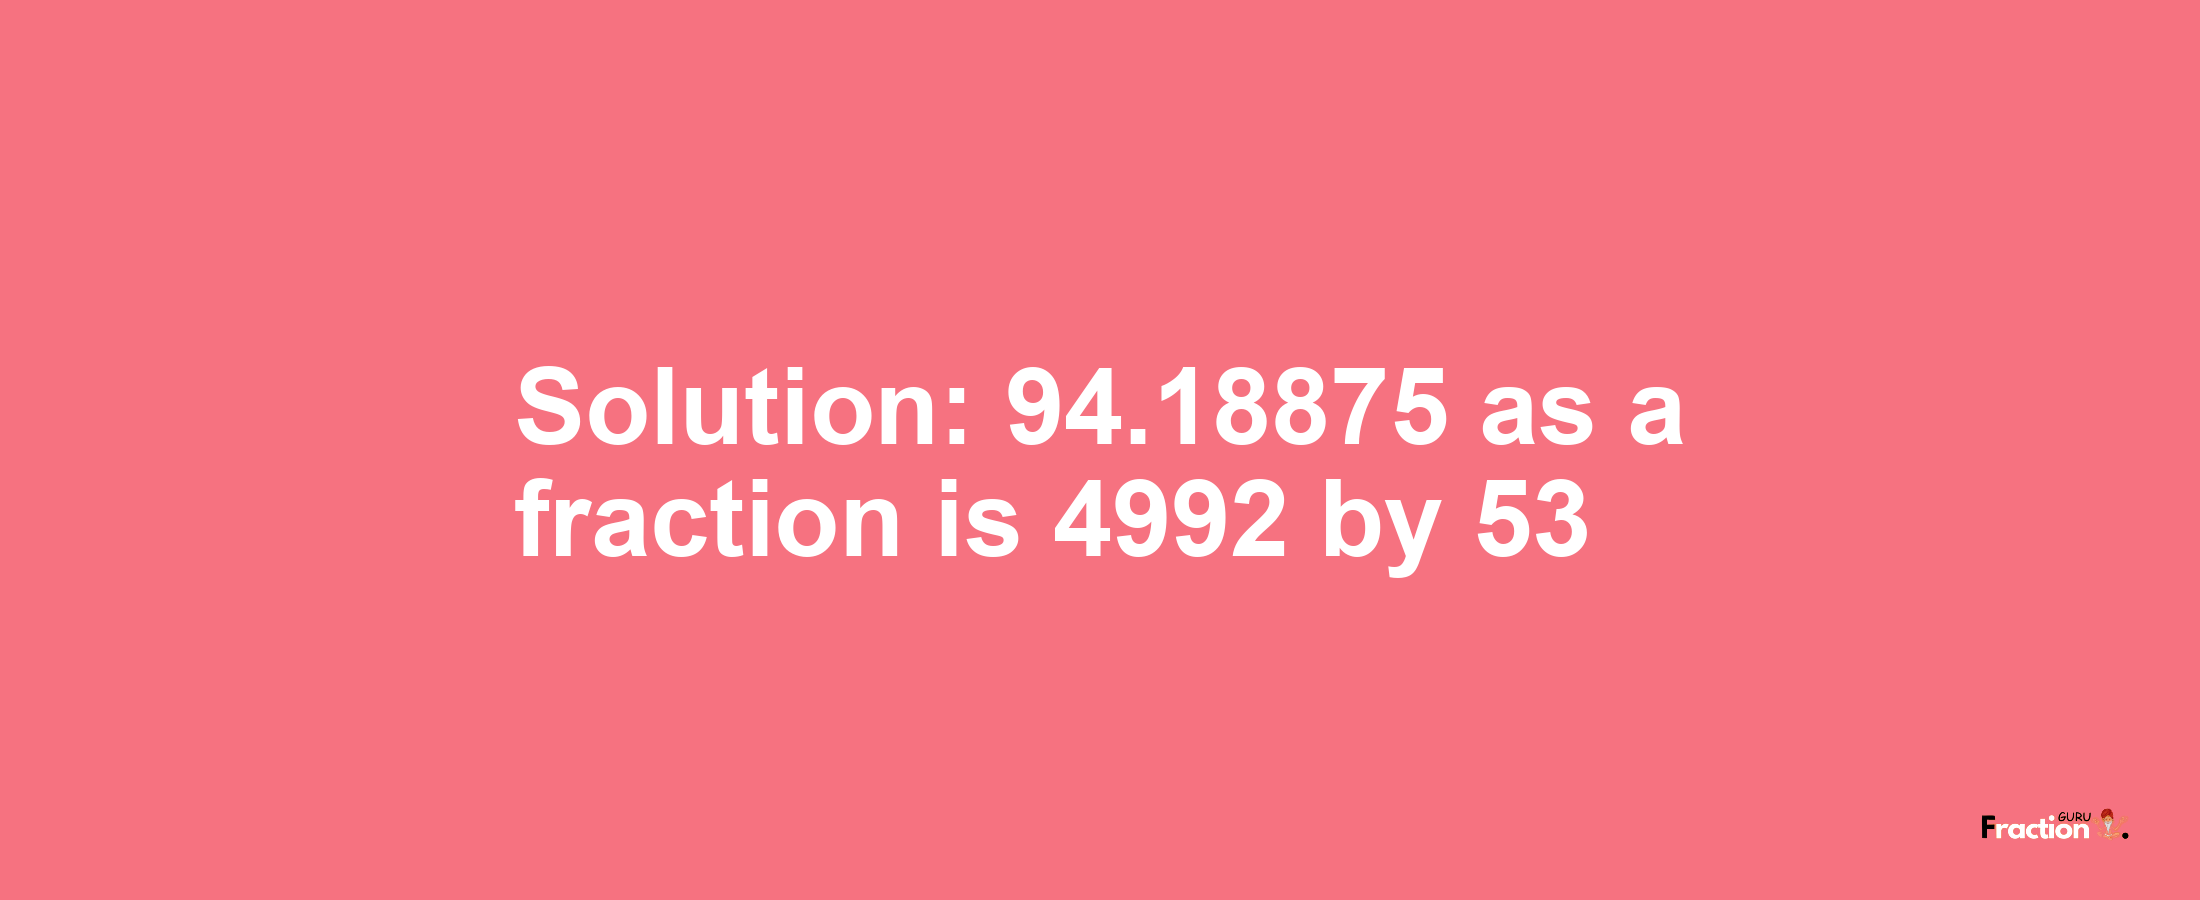 Solution:94.18875 as a fraction is 4992/53